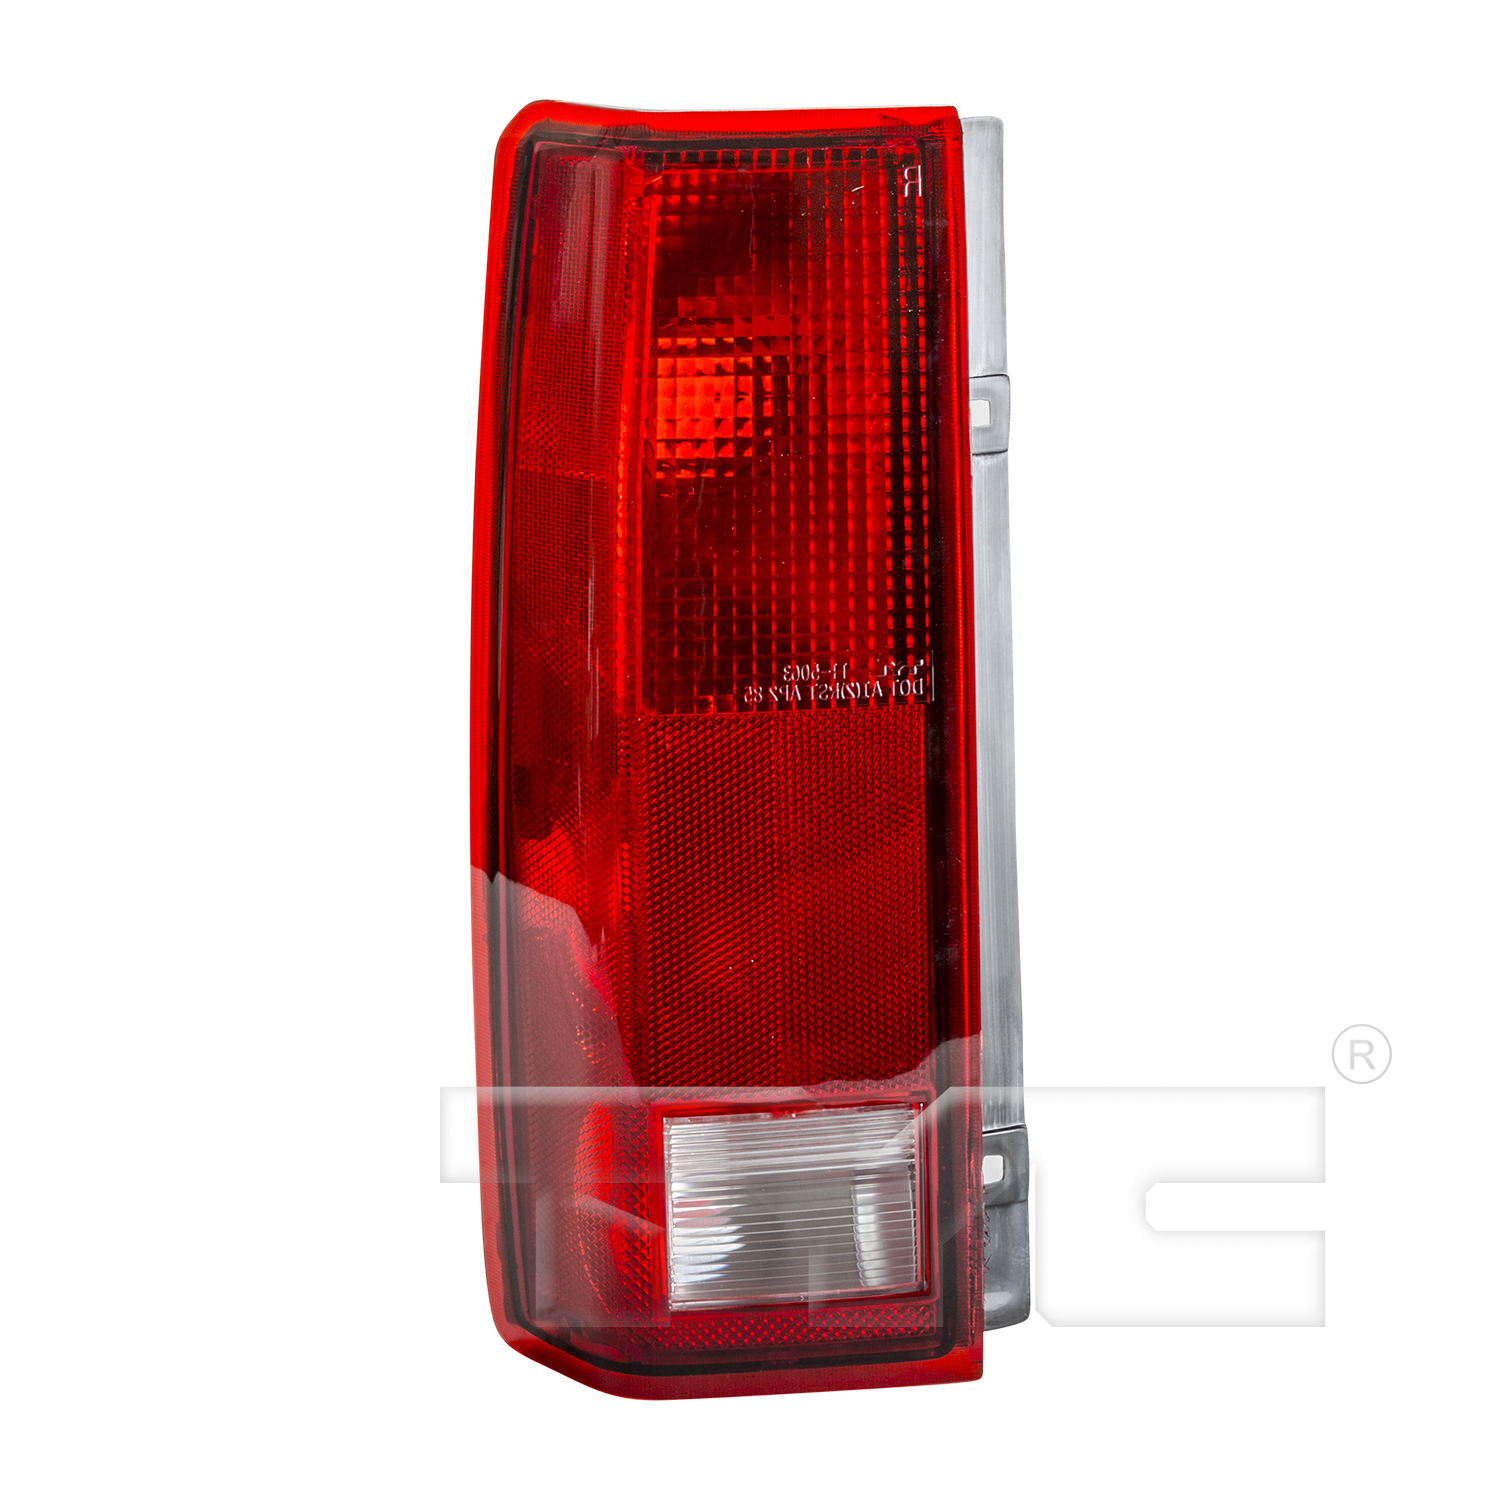 Aftermarket TAILLIGHTS for CHEVROLET - ASTRO, ASTRO,85-05,LT Taillamp assy